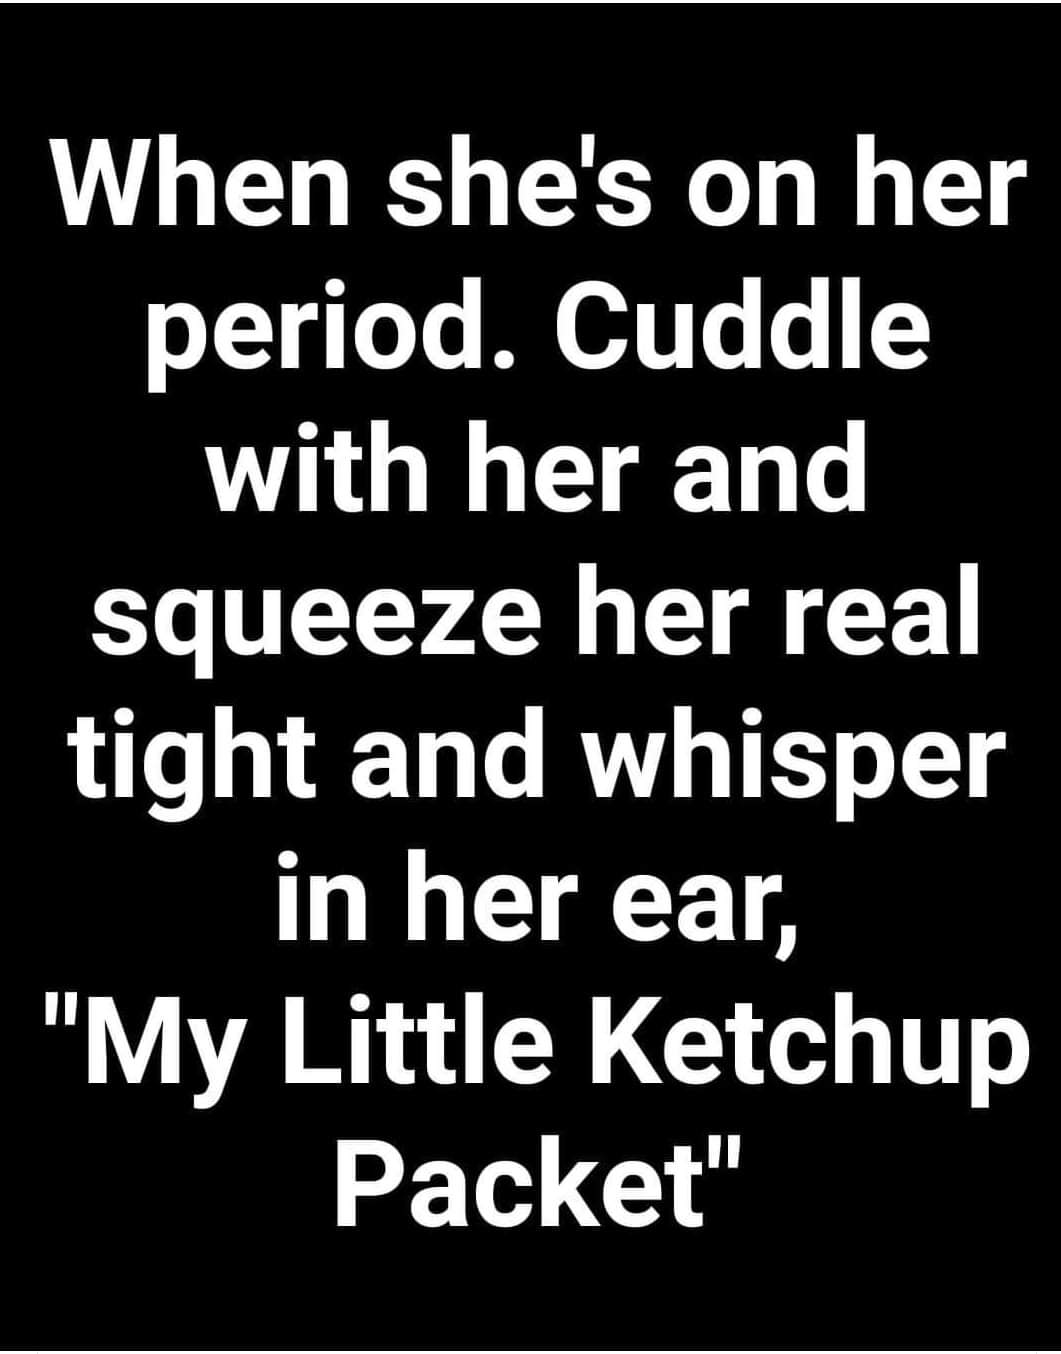 angle - When she's on her period. Cuddle with her and squeeze her real tight and whisper in her ear, "My Little Ketchup Packet"